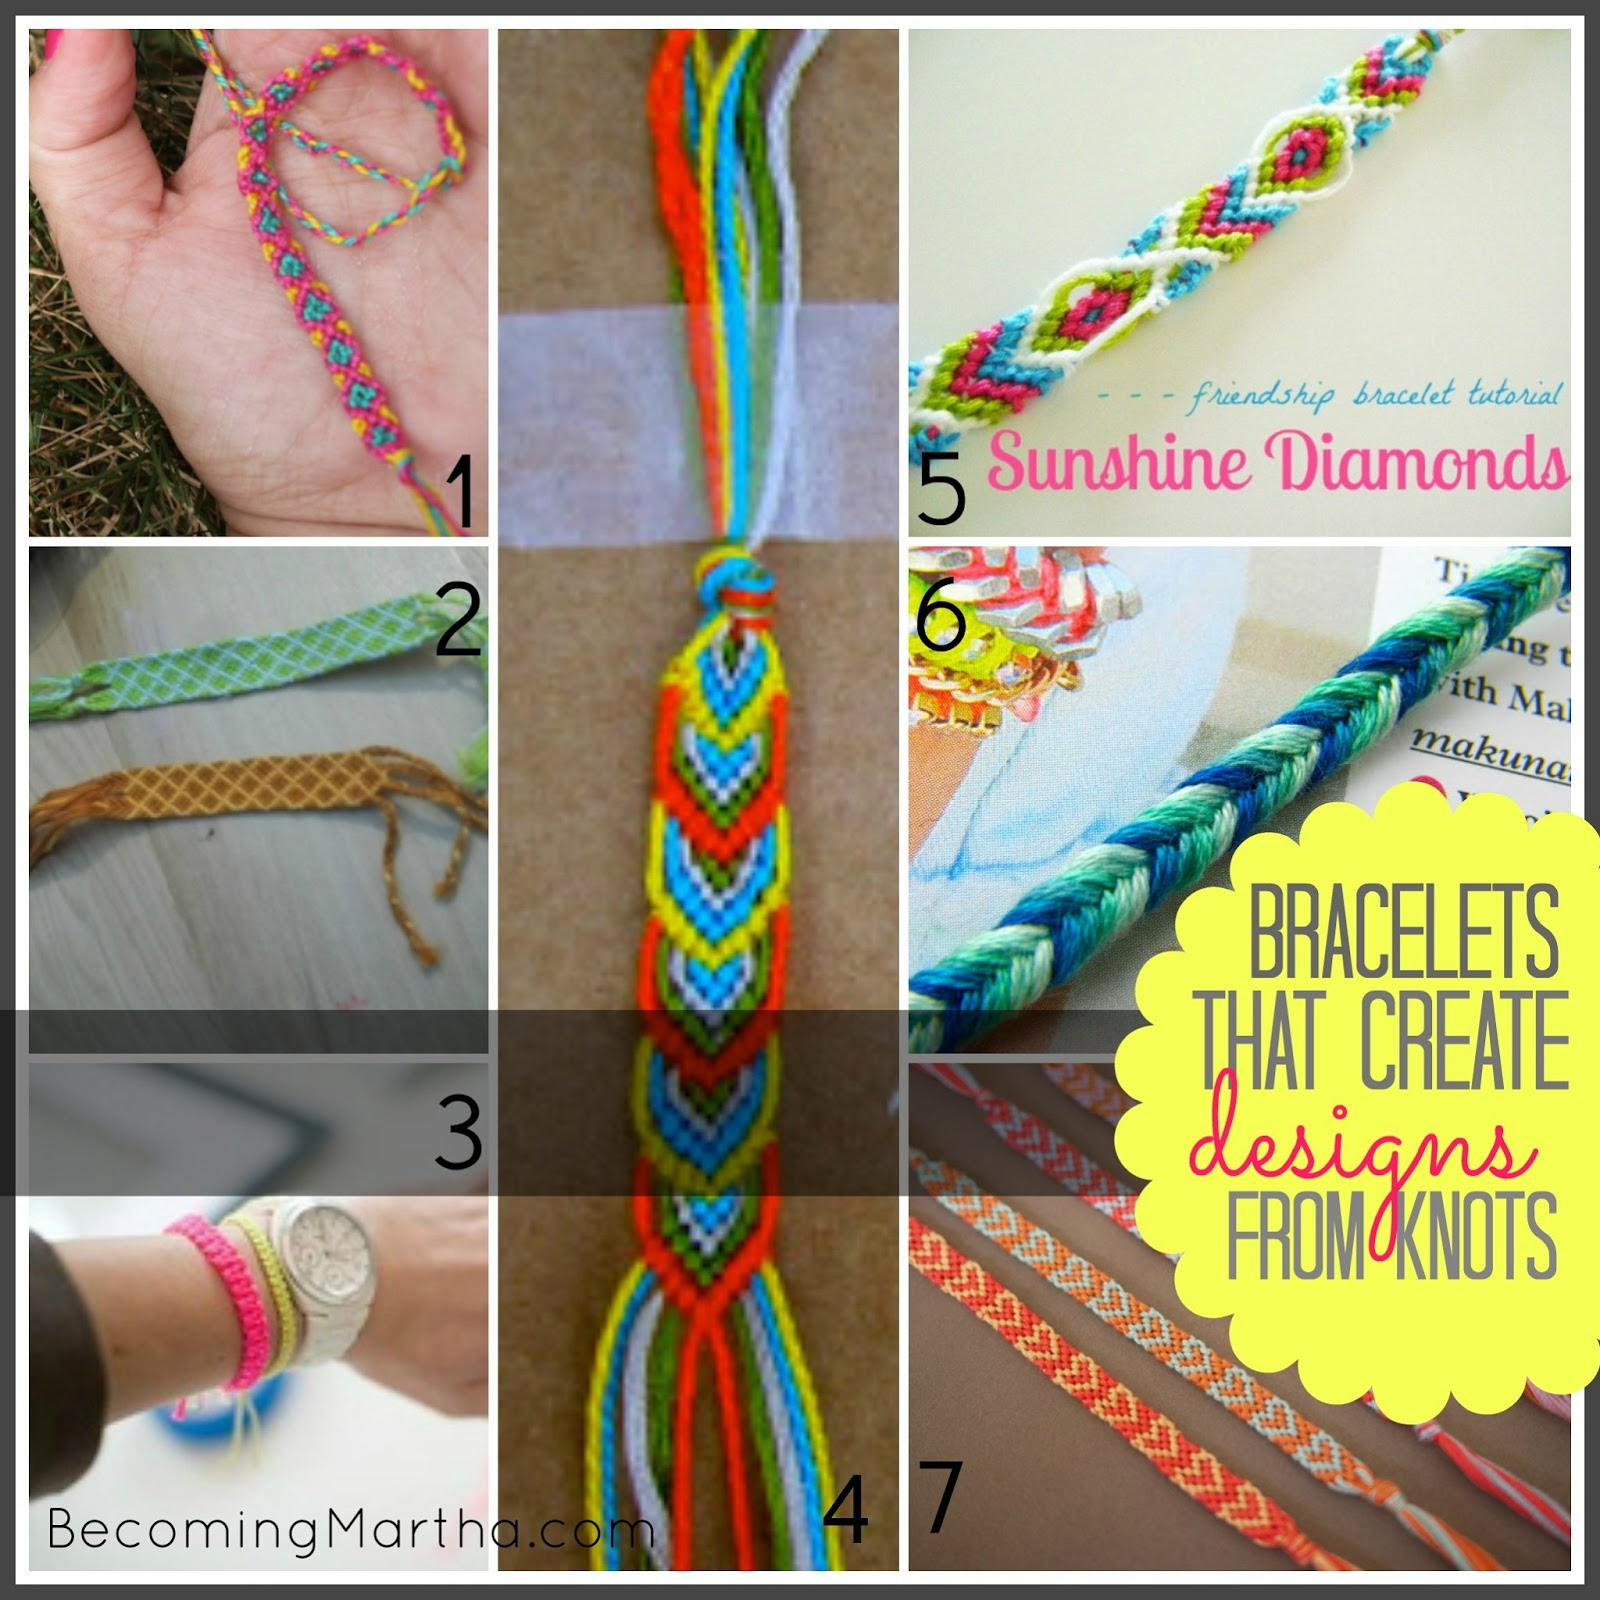 Embroidery Floss Bracelets Patterns 20 Friendship Bracelet Tutorials From 1 Supply The Simply Crafted Life